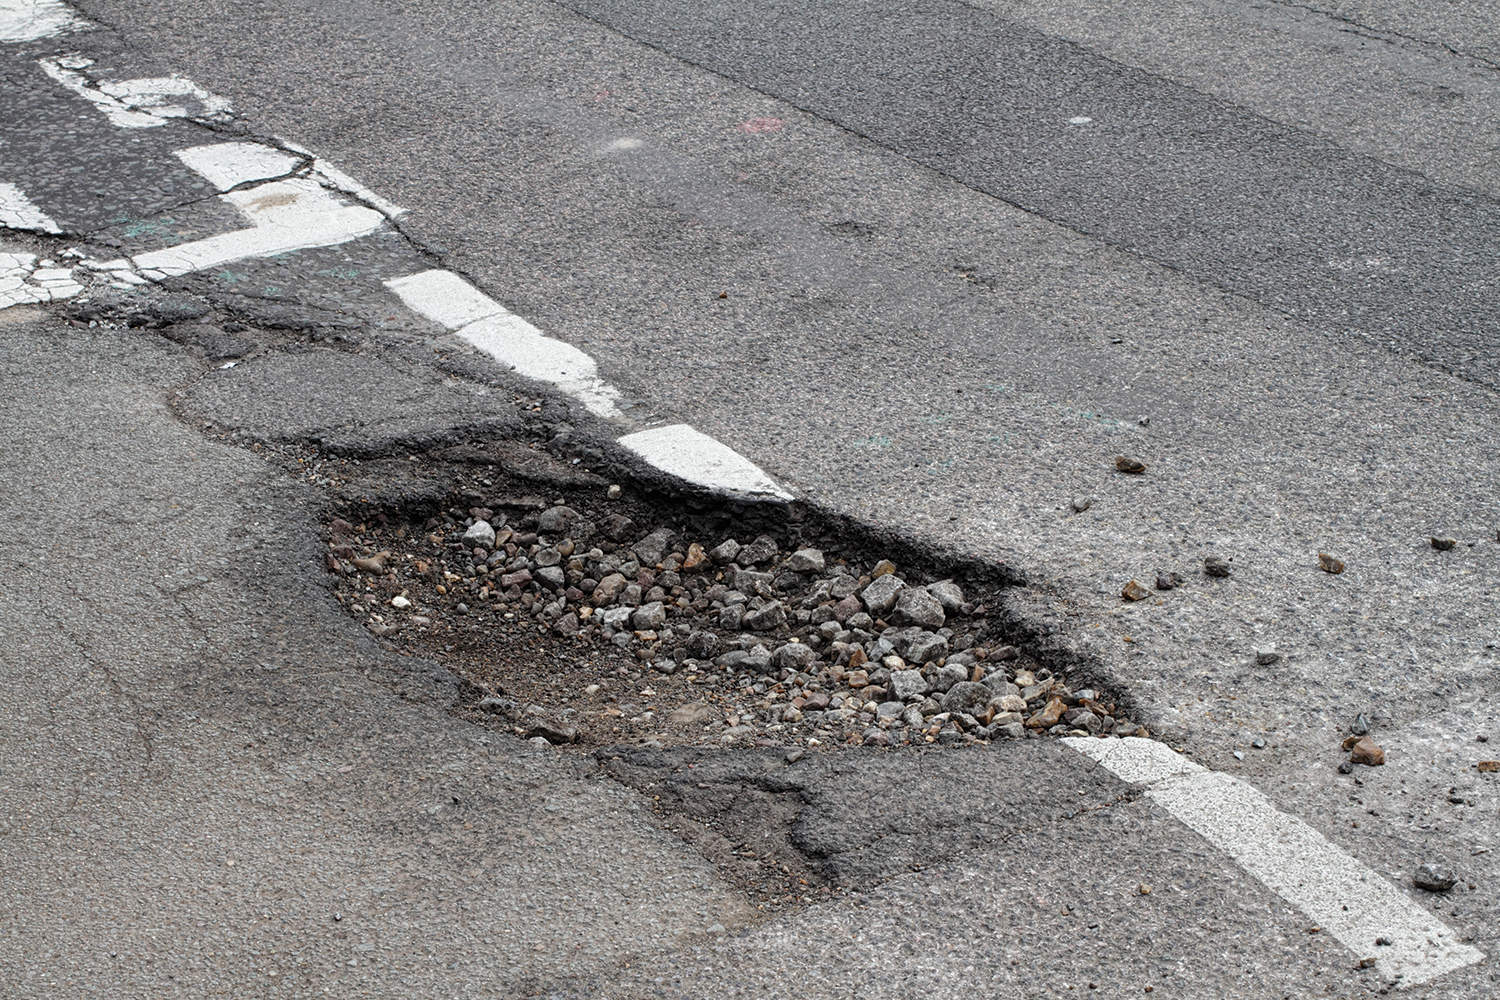 A large pothole in a road.